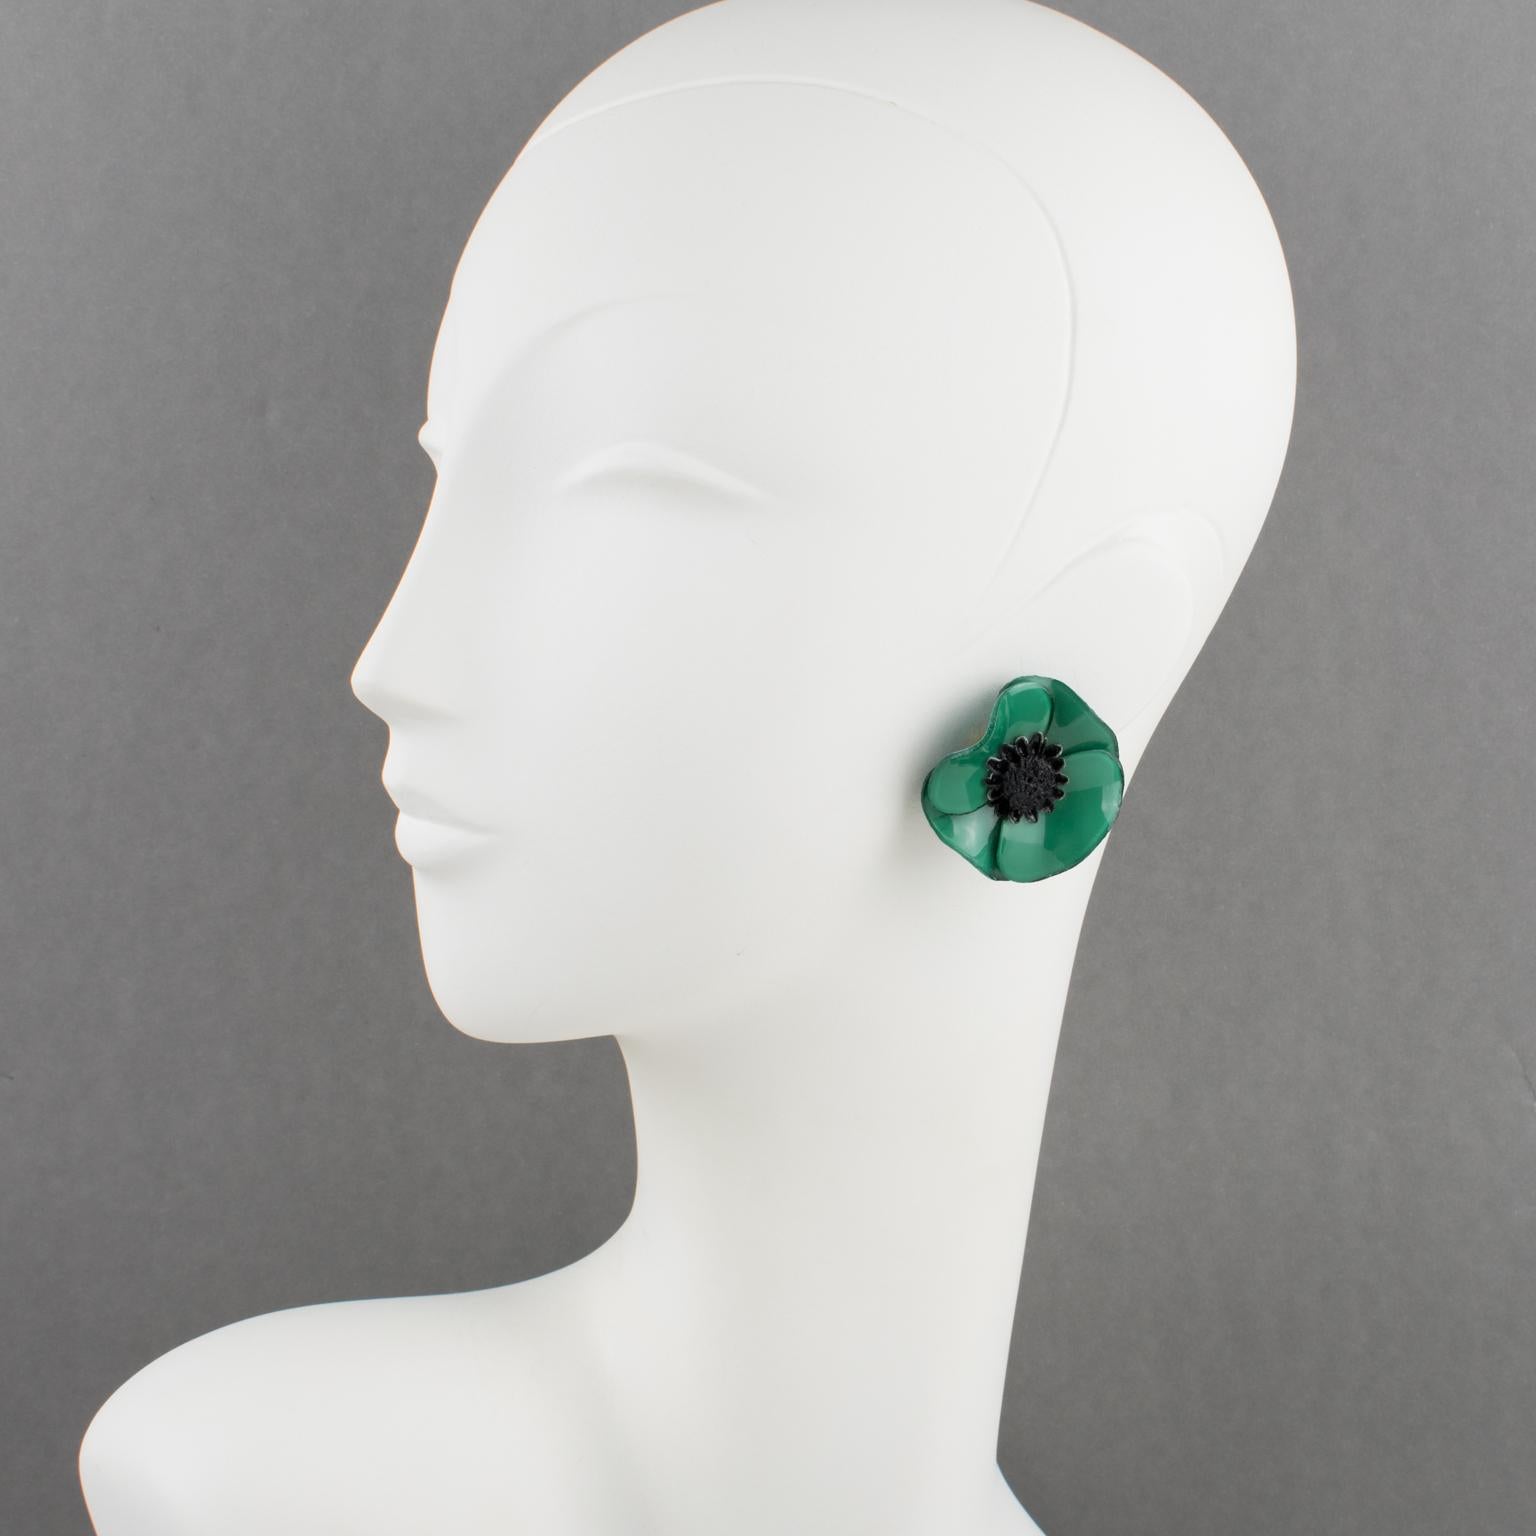 Elegant dimensional clip-on earrings by Cilea Paris. Floral-inspired hand-made artisanal resin earrings featuring a large poppy flower with a textured heart. A very nice assorted palette of peacock green and black. Signed underside: Cilea - Paris.